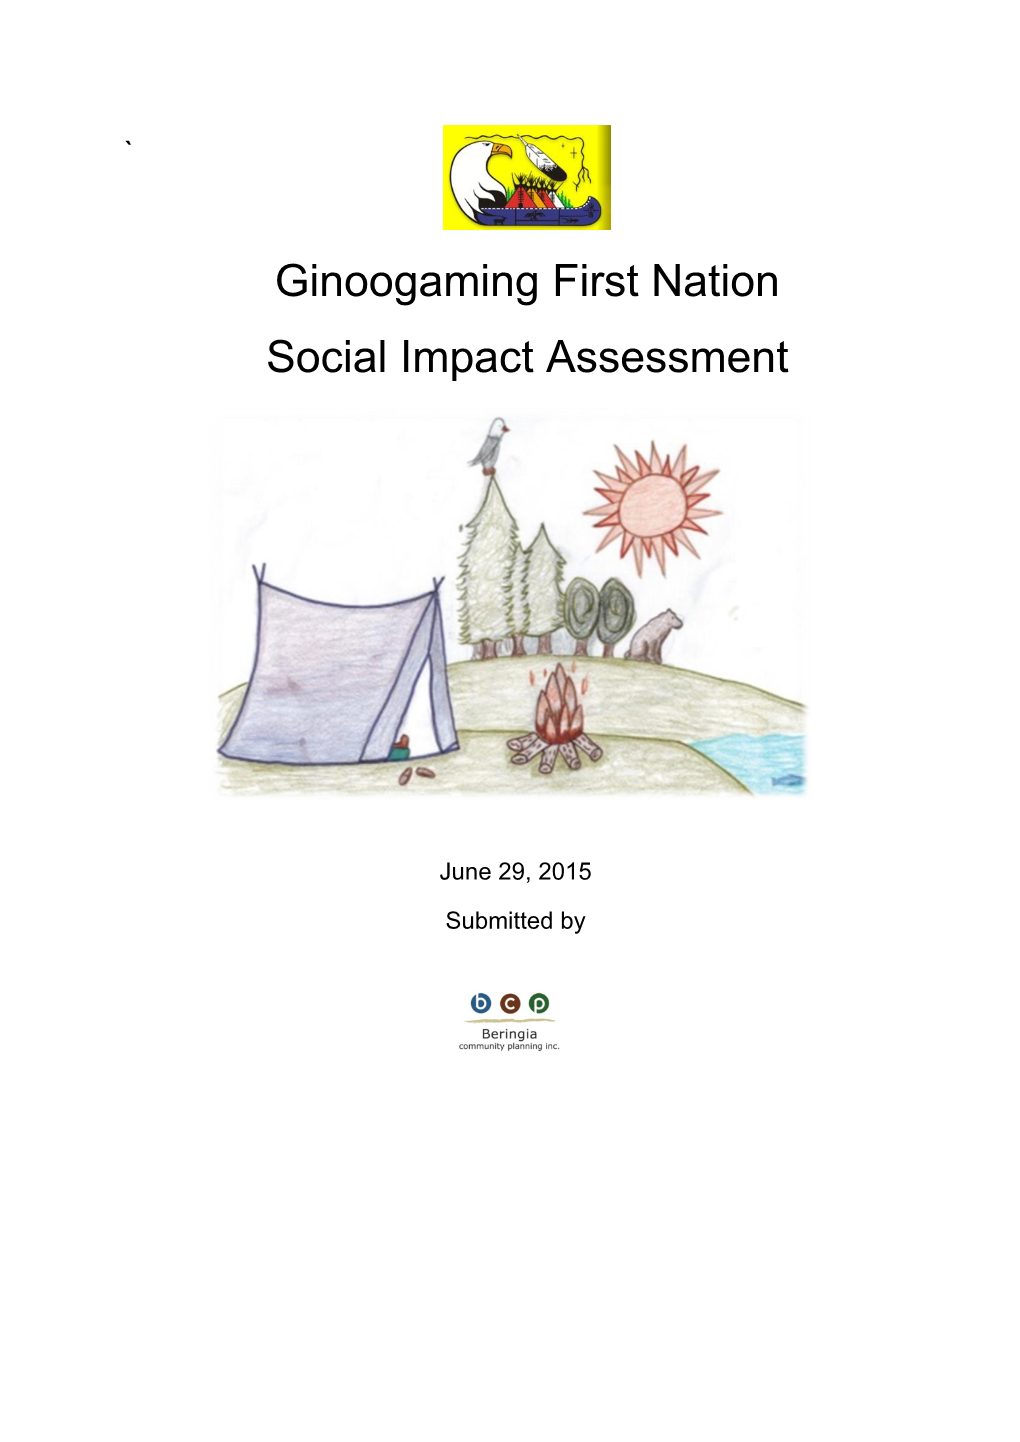 Ginoogaming First Nation Social Impact Assessment